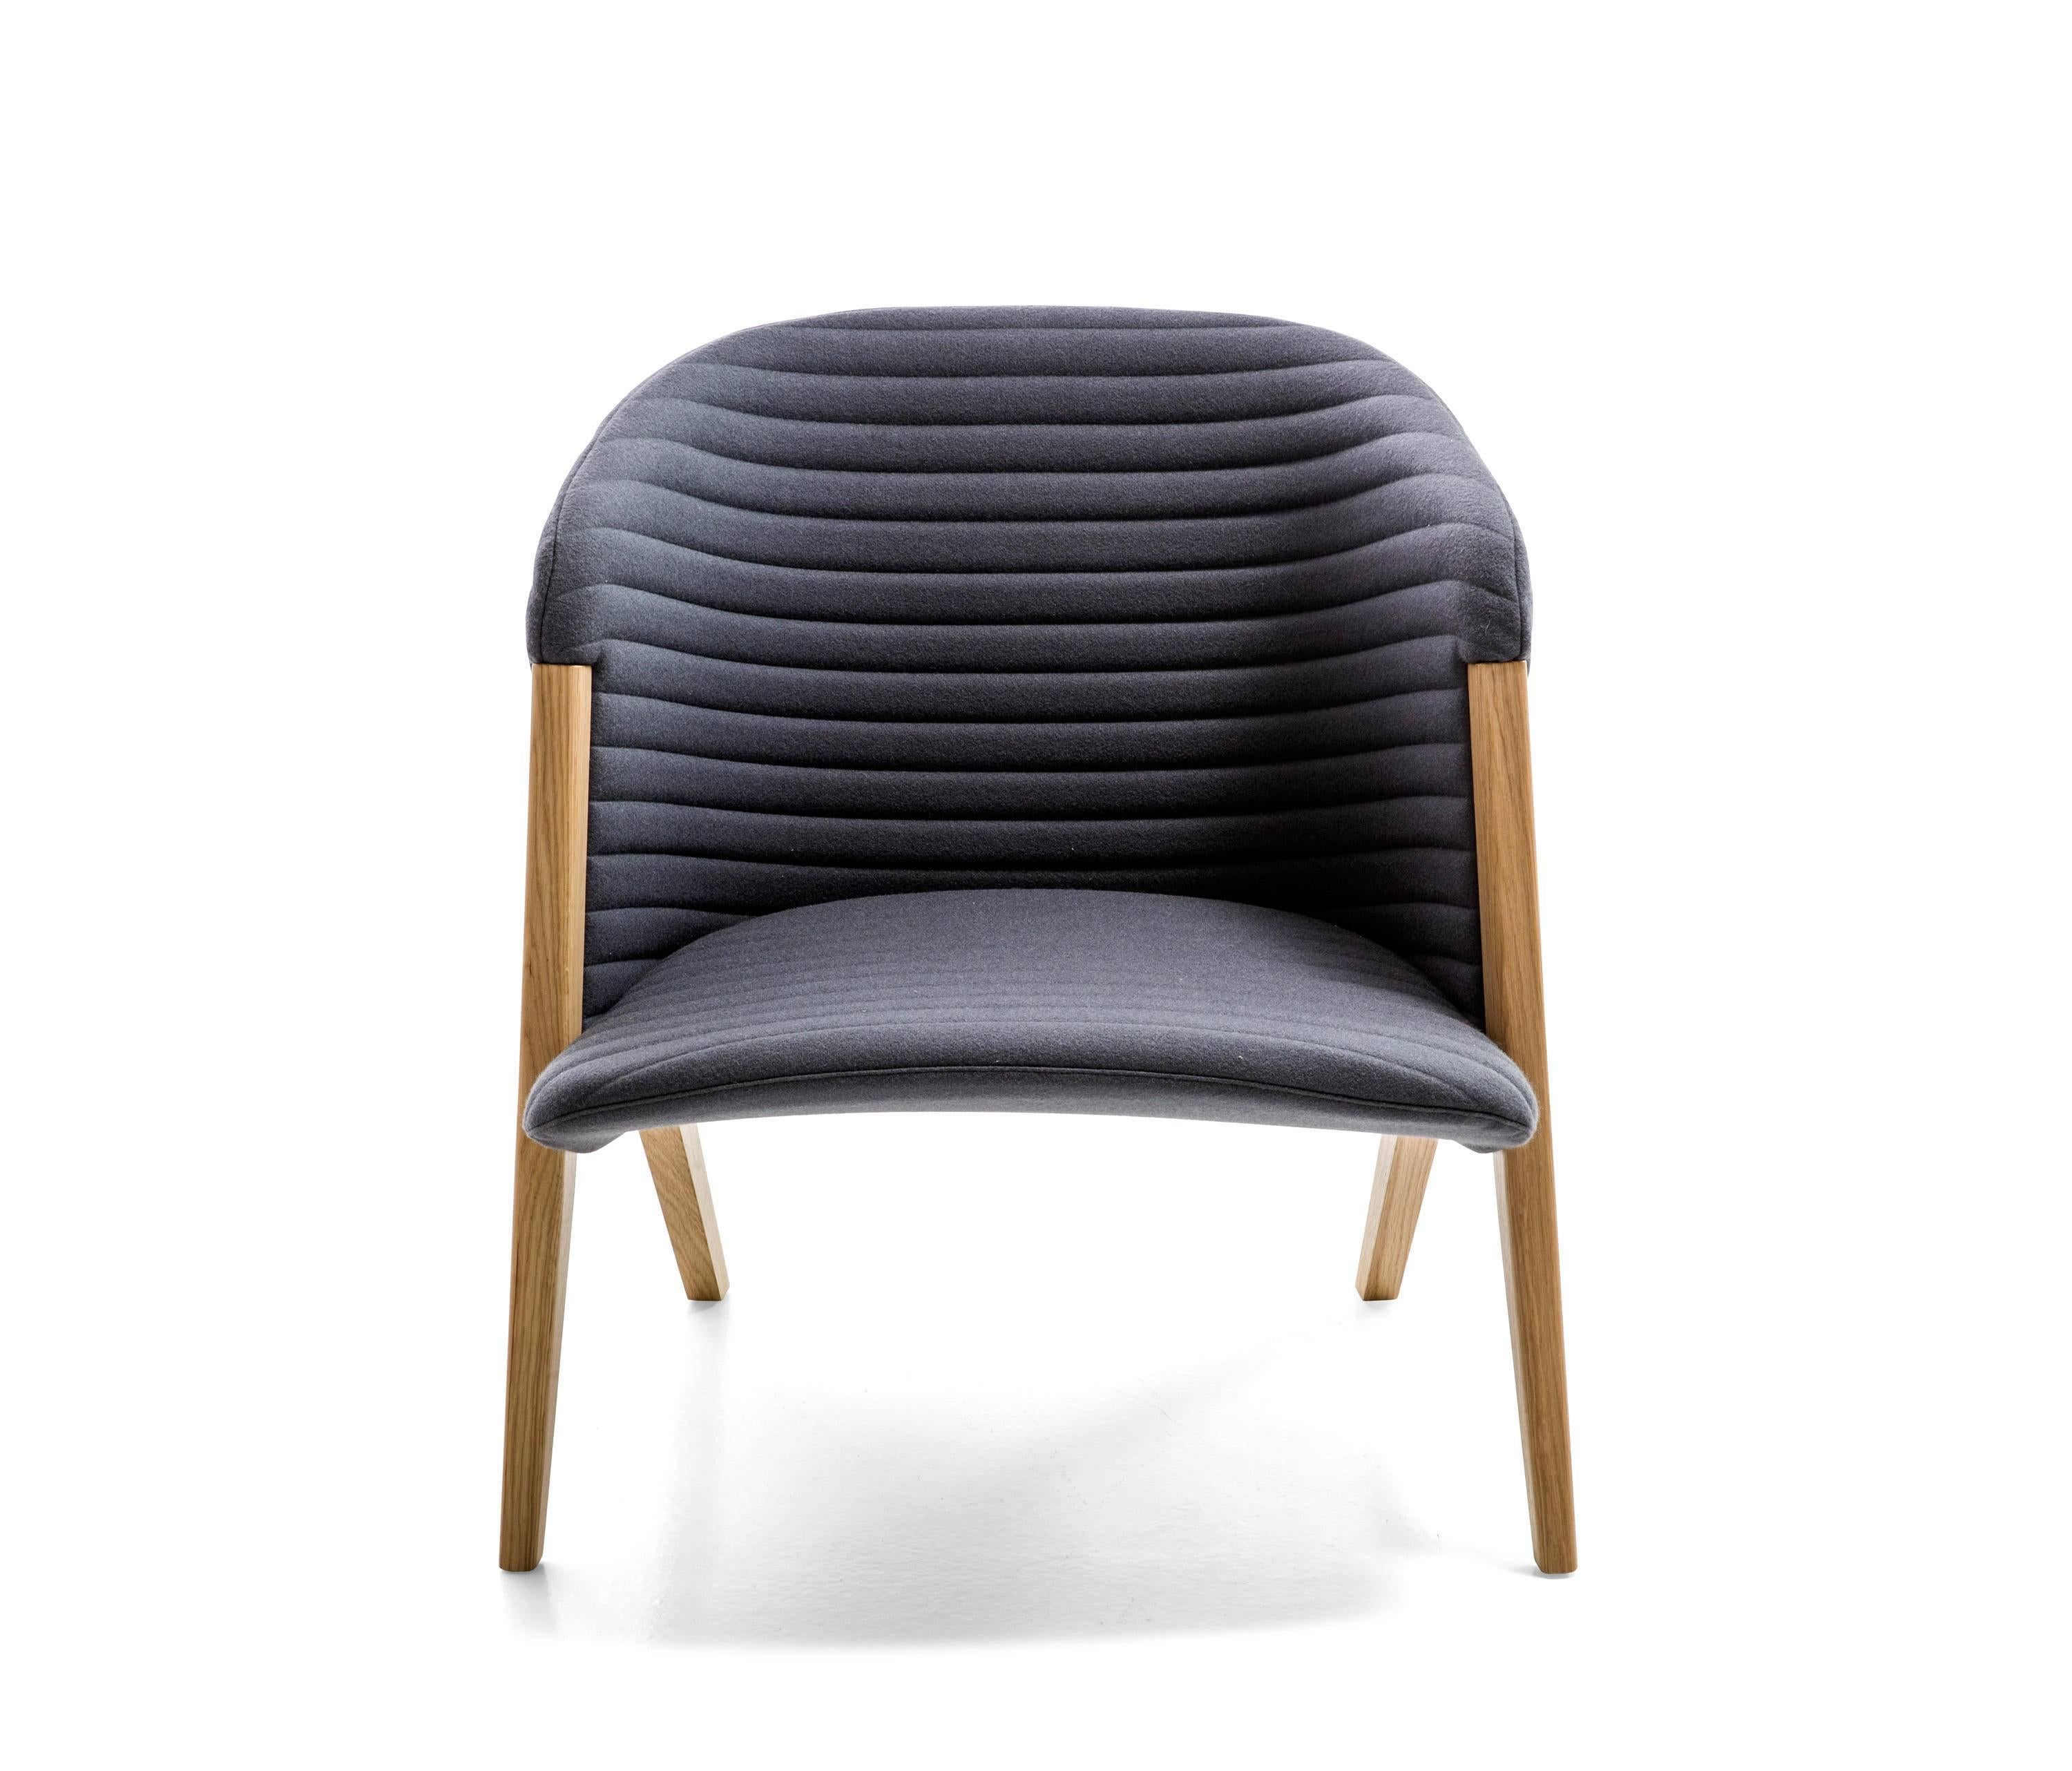 Light and welcoming in shape and character, Mafalda brings together three conceptually distinct components to form a single body: seat, shell and wood base. The result is a distinctive, almost humorous, character. The name is deliberately borrowed